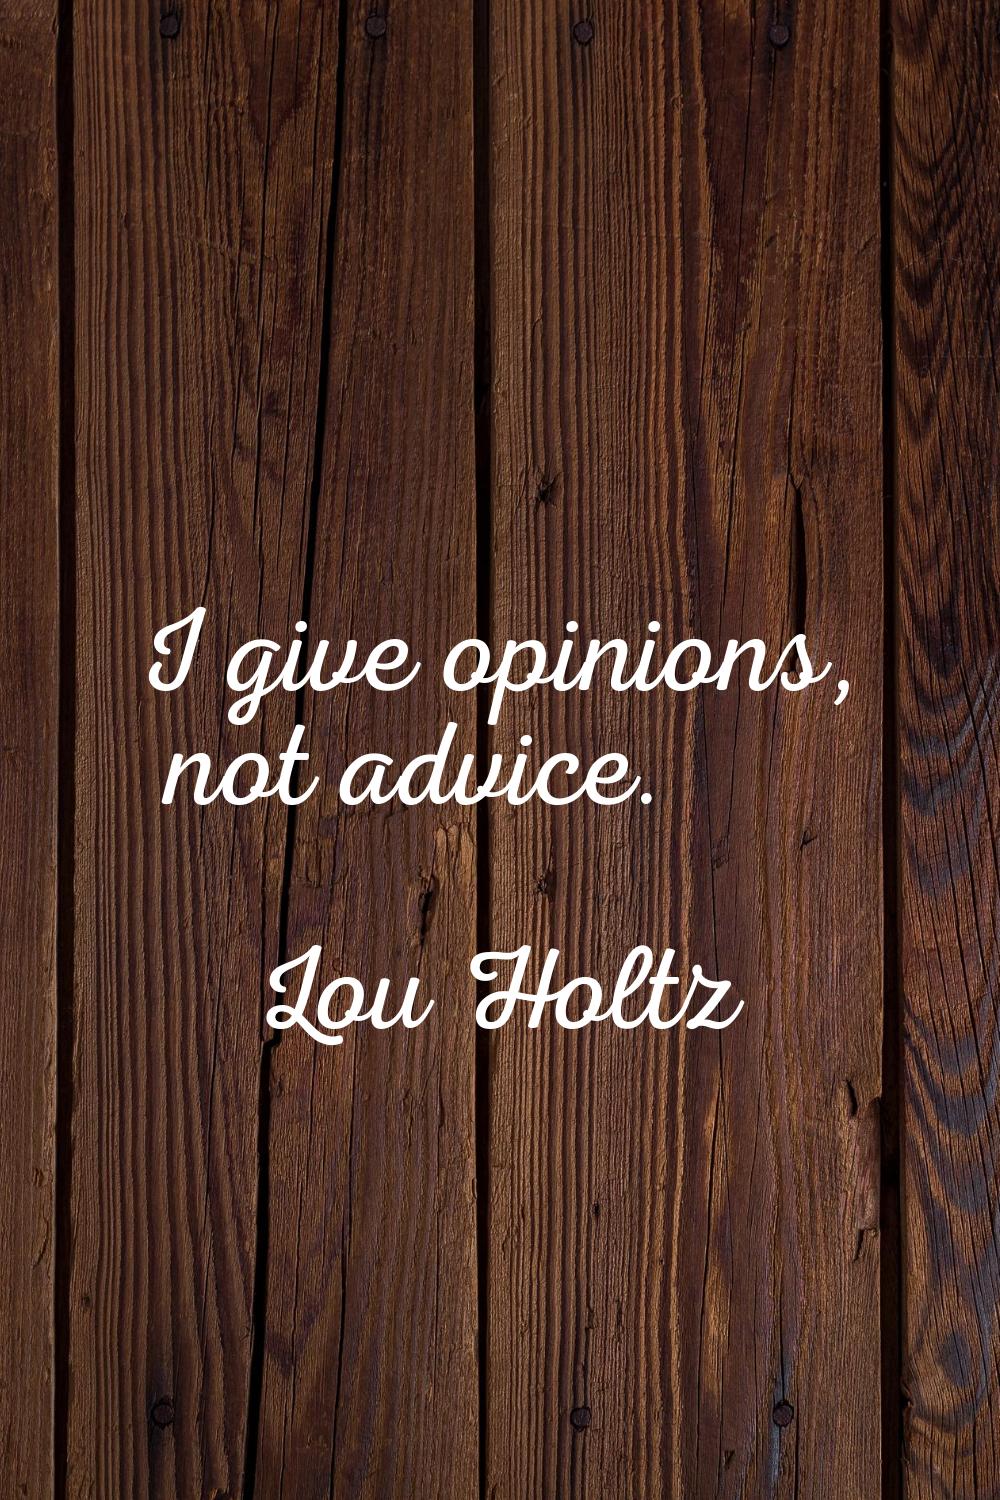 I give opinions, not advice.